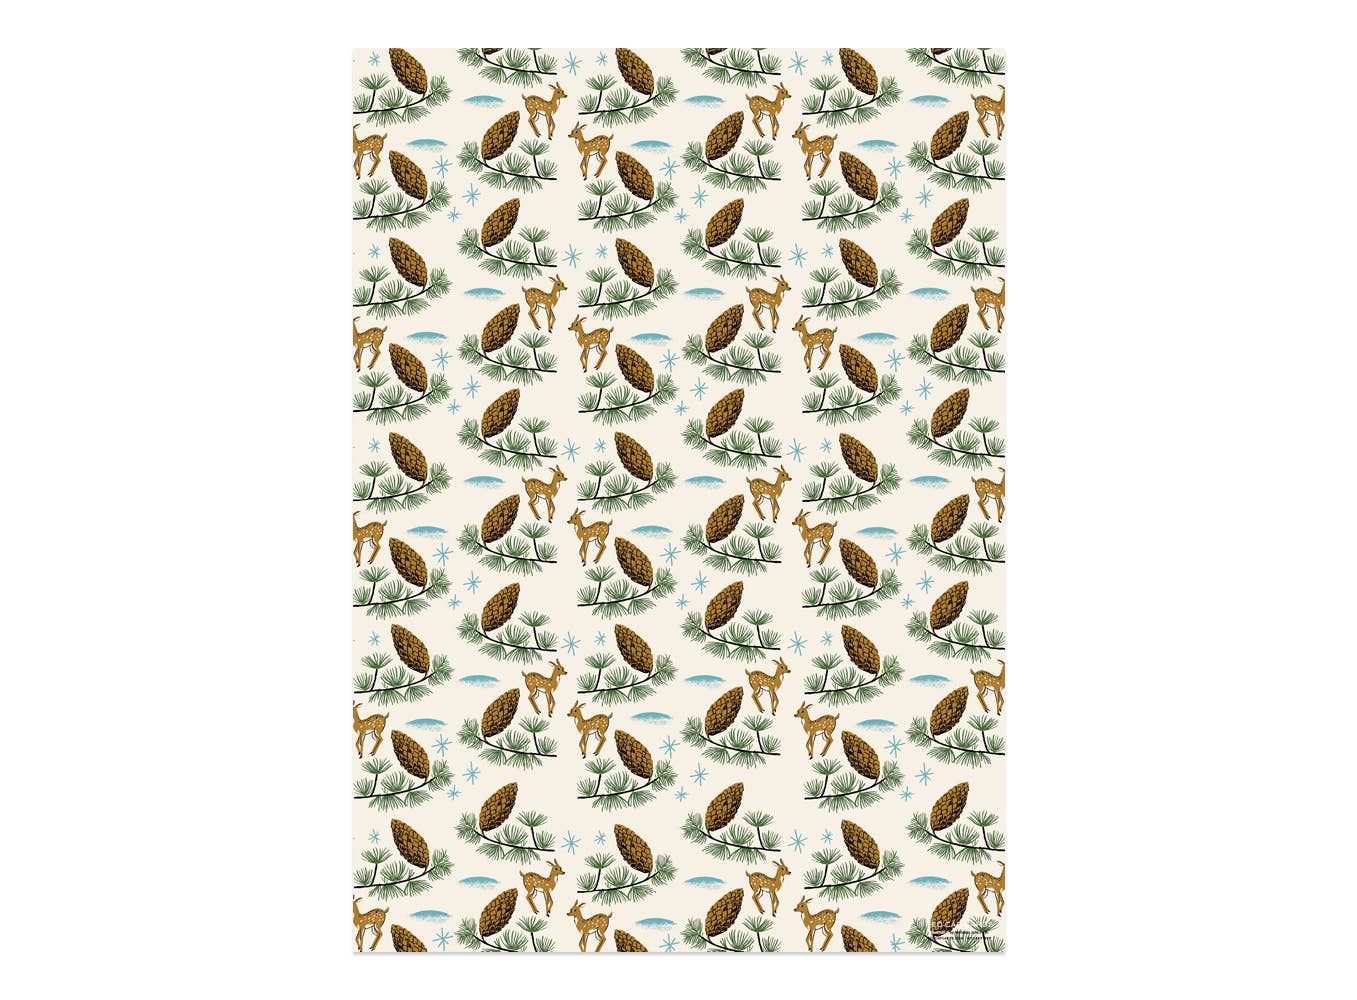 Deer and Pine Cones holiday wrapping paper rolls